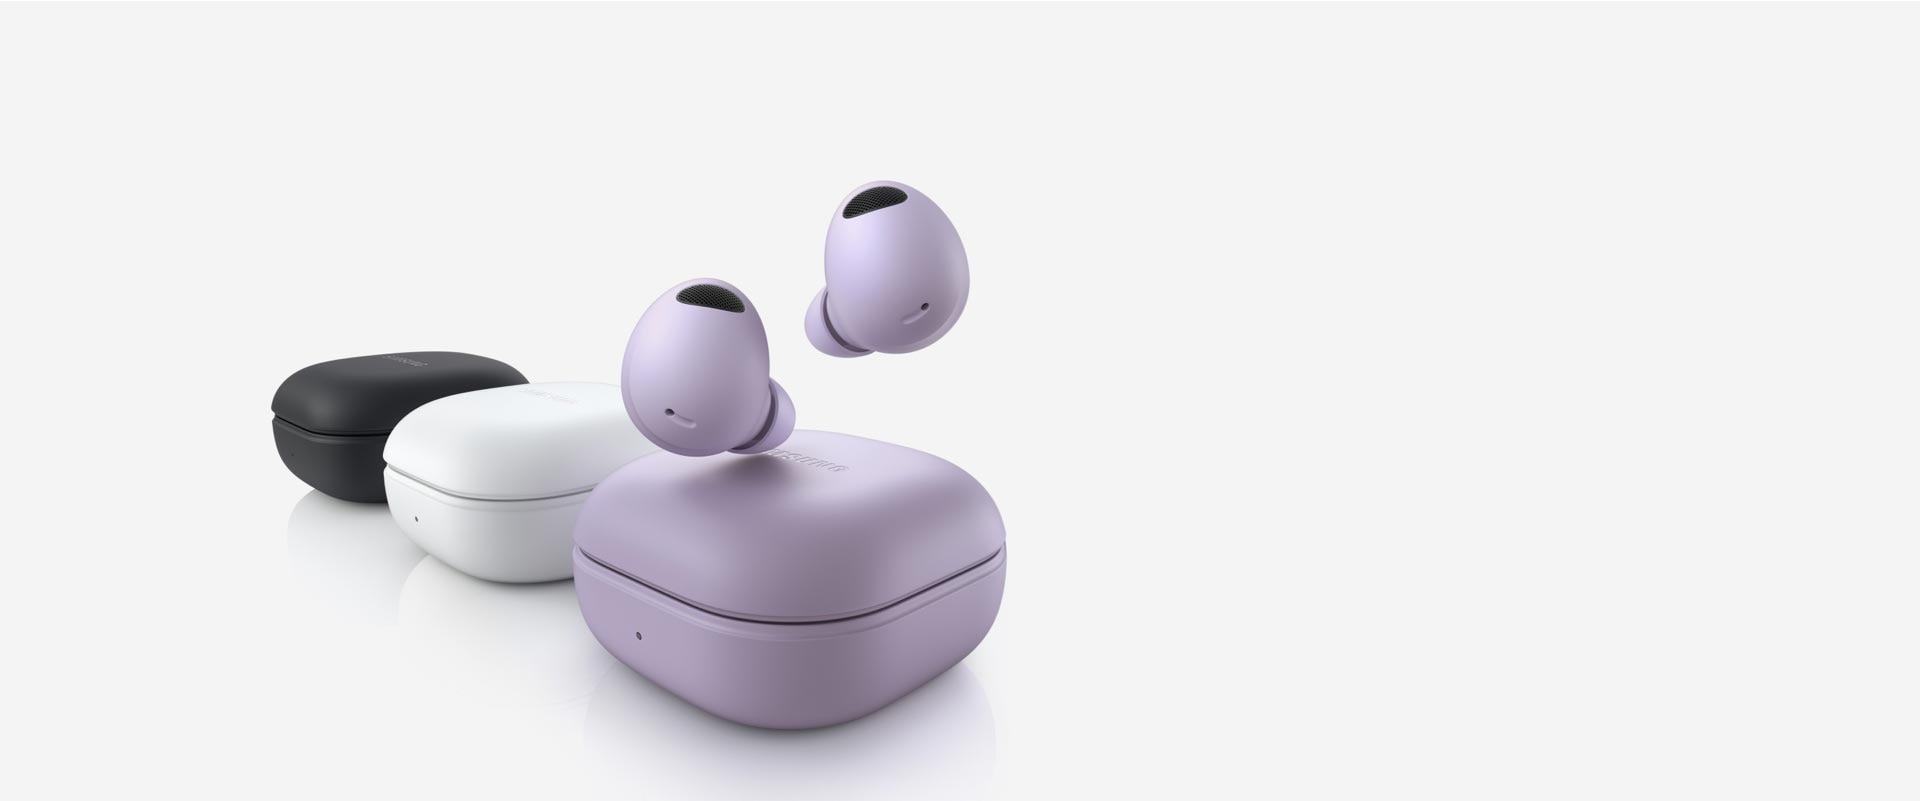 Three Galaxy Buds2 Pro devices are lined up. The Bora Purple Galaxy Buds2 Pro device in the front has two buds hovering above the closed case. The middle White closed case is followed by a Graphite closed Buds2 Pro case.